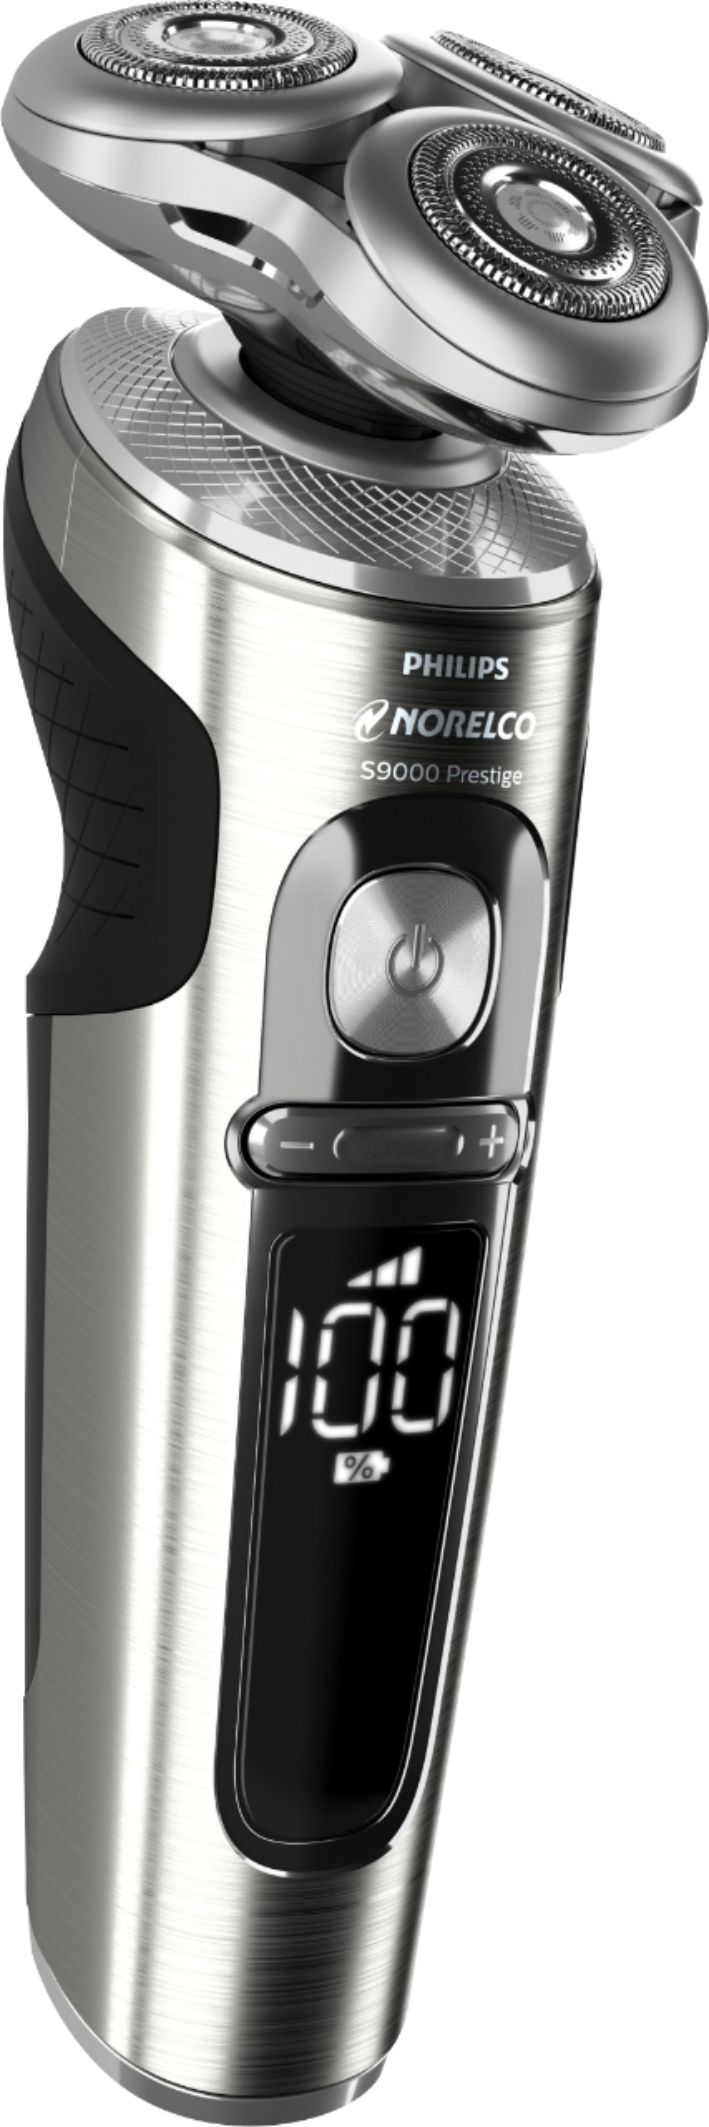 Customer Reviews: Philips Norelco S9000 Prestige Electric Shaver 